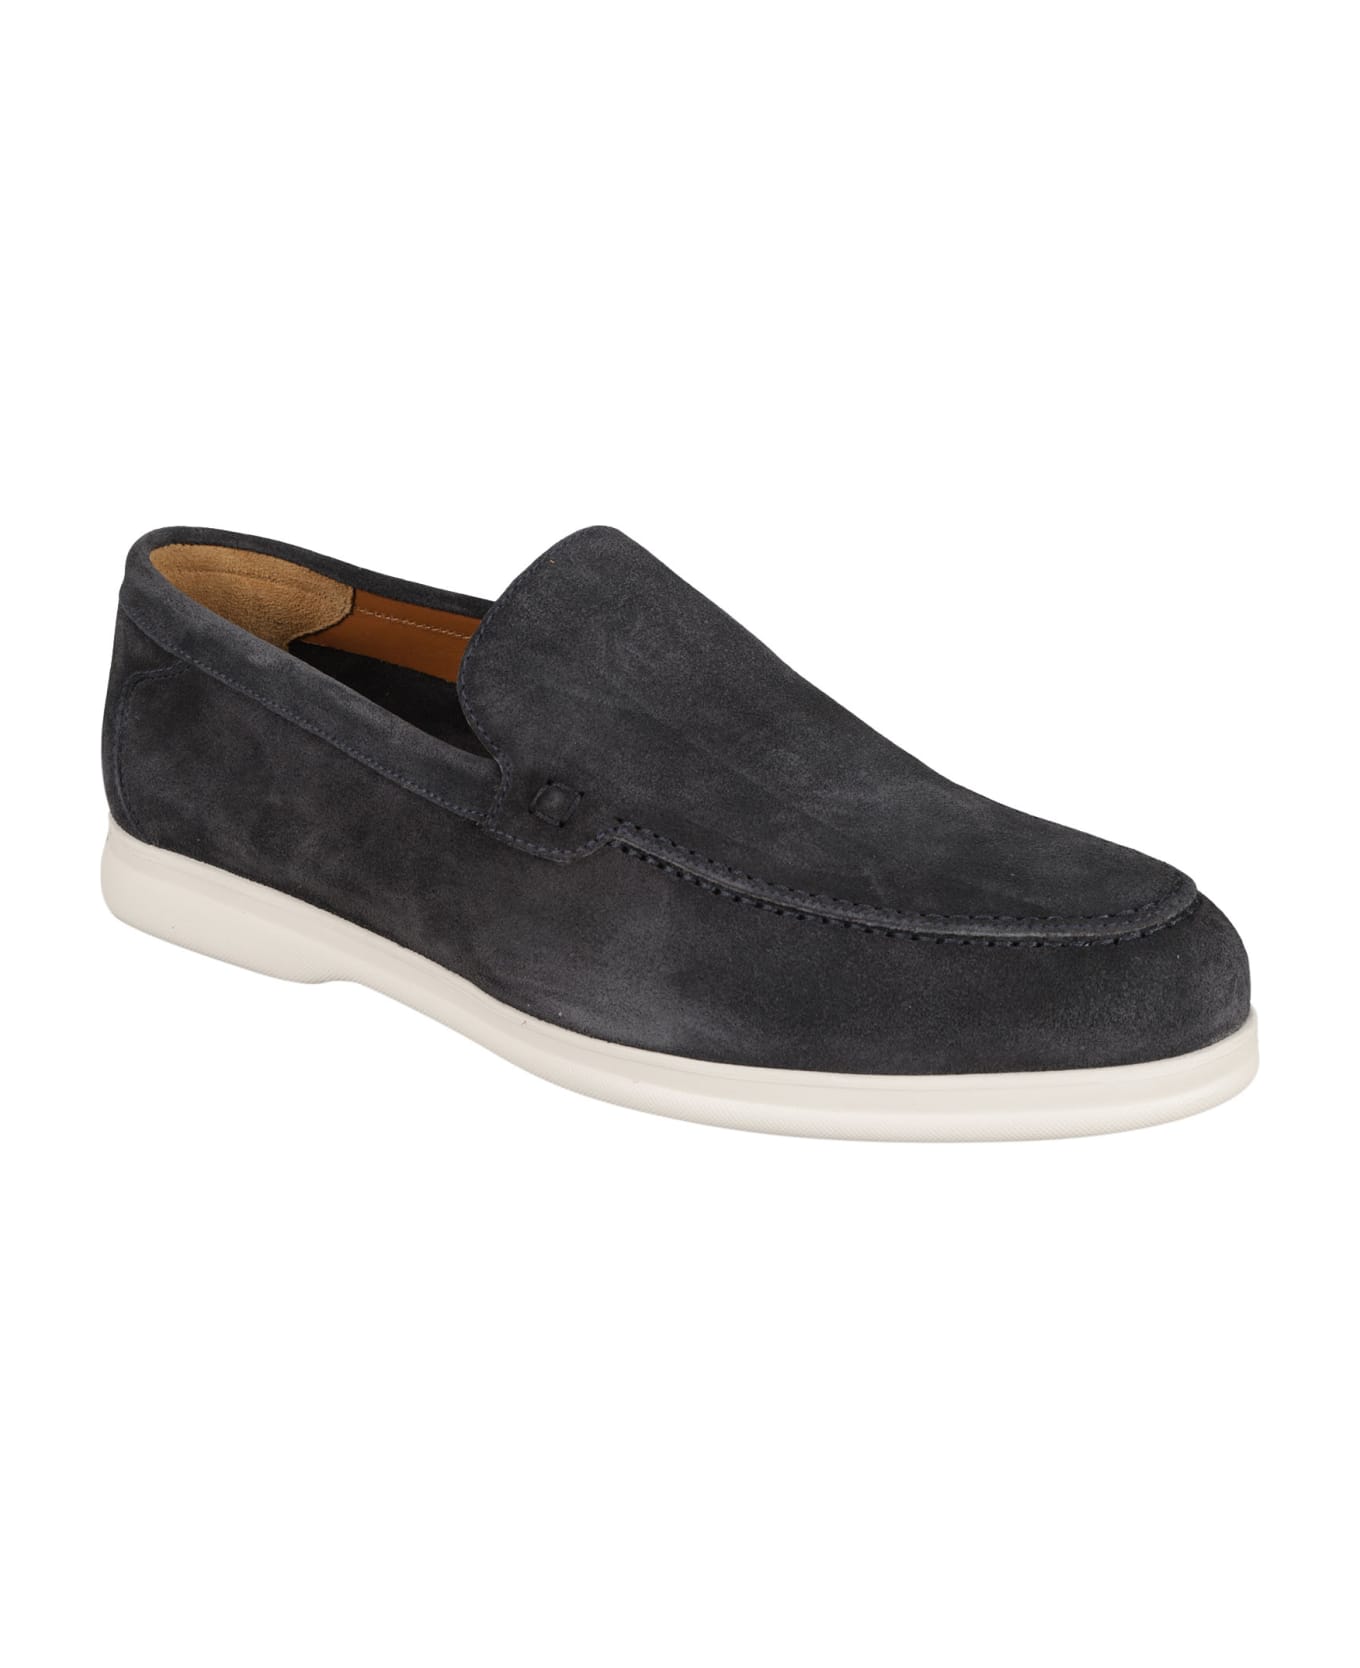 Doucal's Slip-on Classic Loafers - NAVY